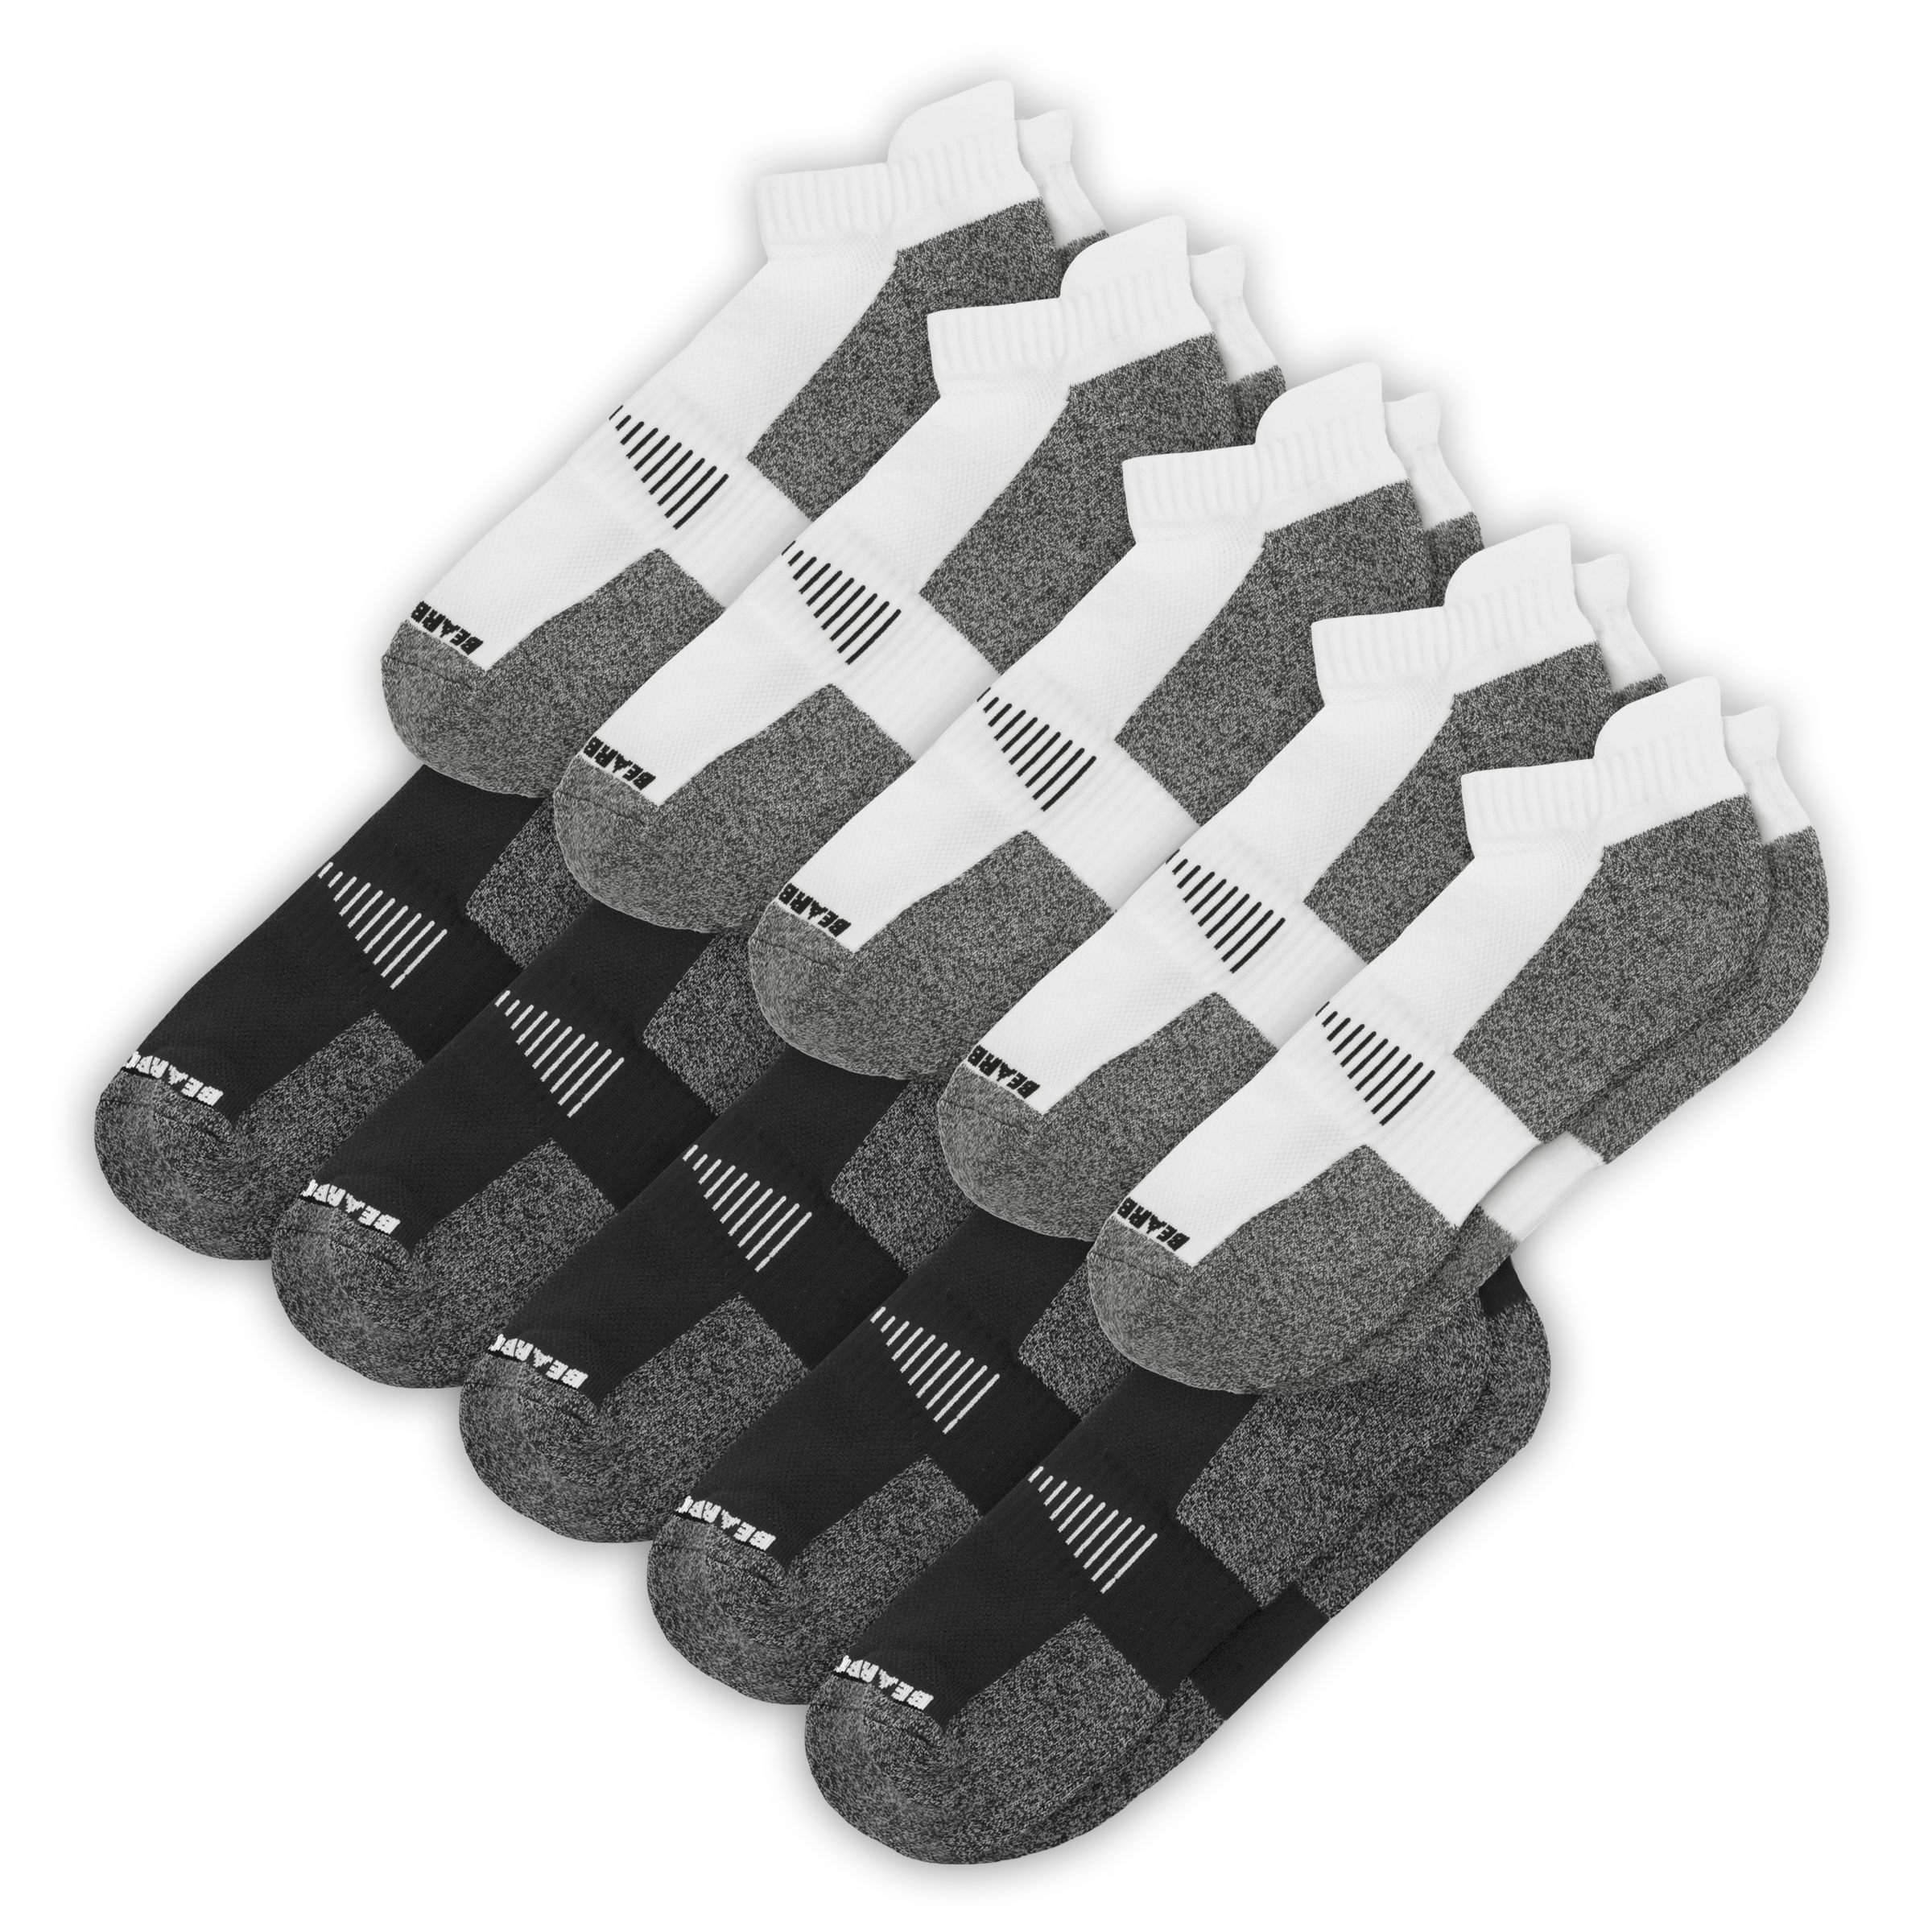 5 Pairs of Performance Ankle Socks White and 5 Pairs of Performance Ankle Socks Black with arch support and grey padding in heel